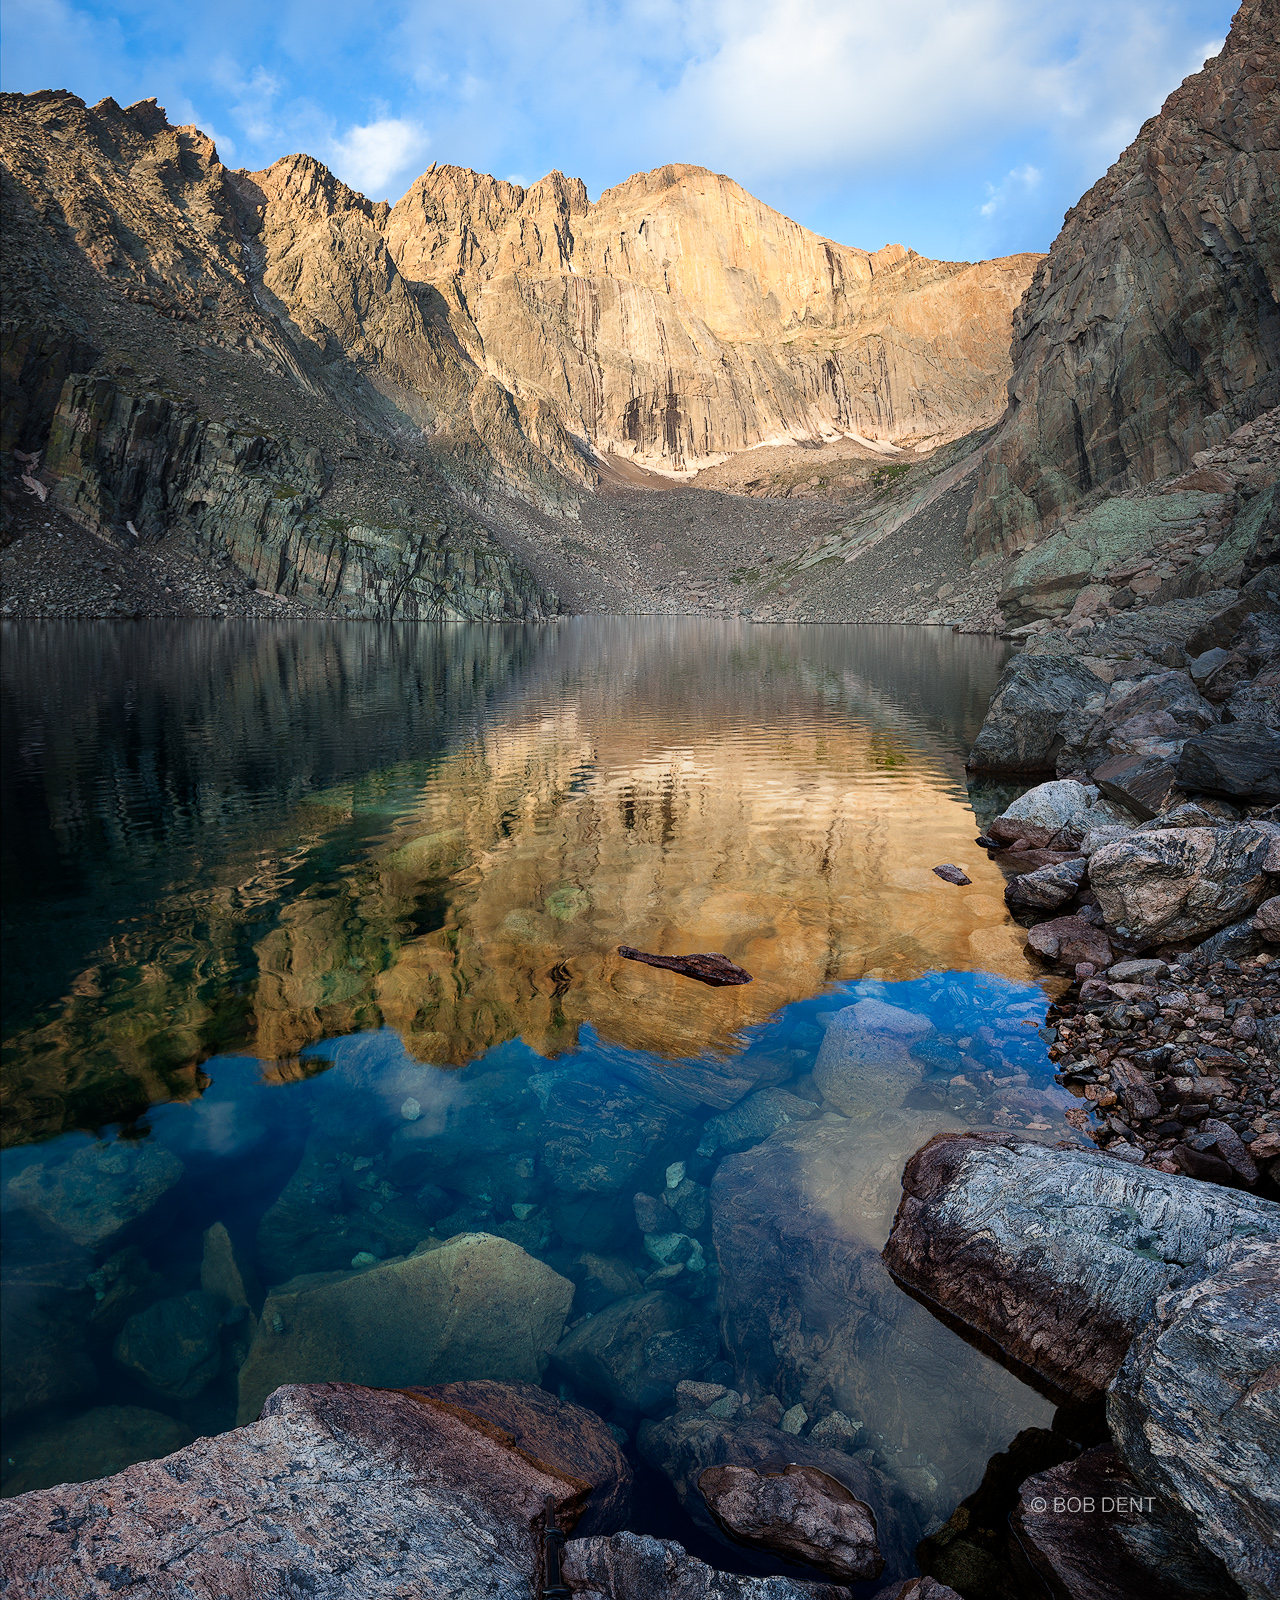 The East face of Longs Peak reflecting in Chasm Lake.